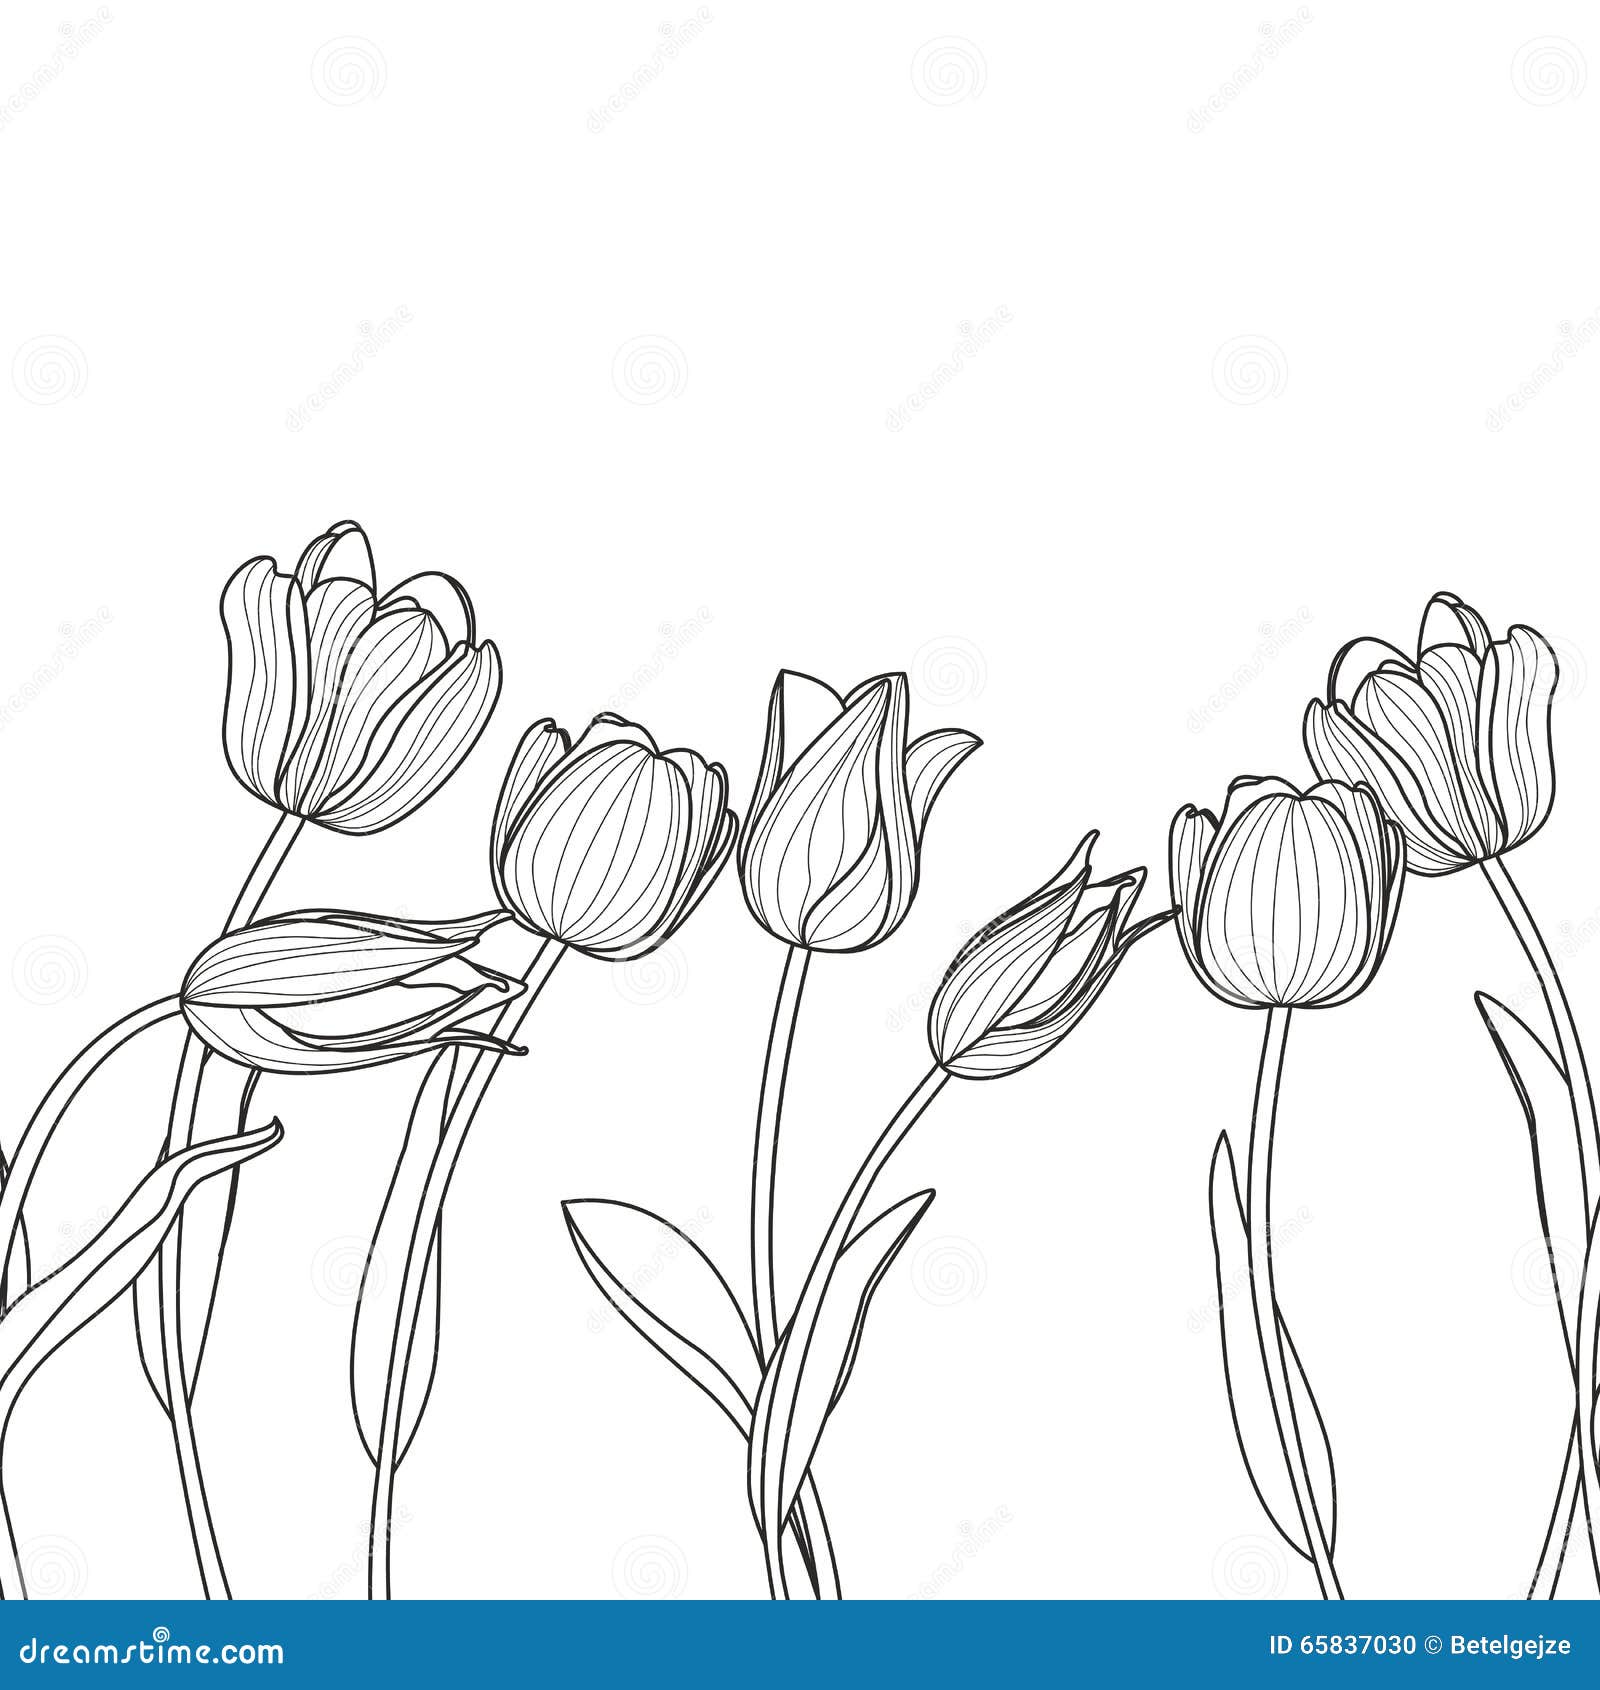  floral seamless horizontal pattern. black and white elegant background with hand drawn tulip flowers.